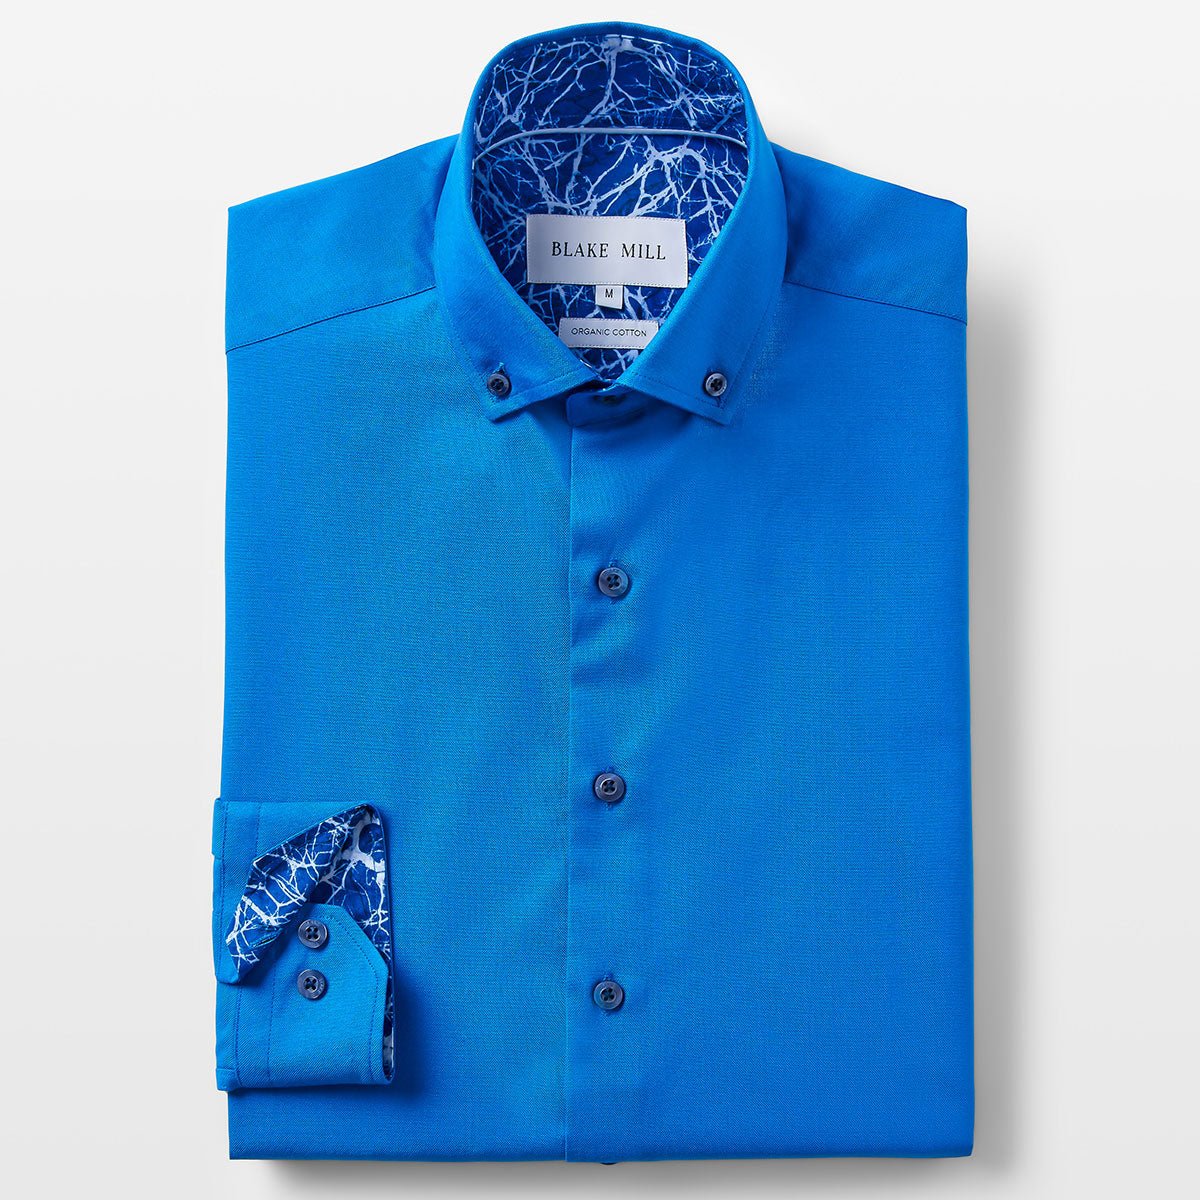 Cobalt Blue Oxford with Mind Maps Accents Button-Down Shirt - Blake Mill